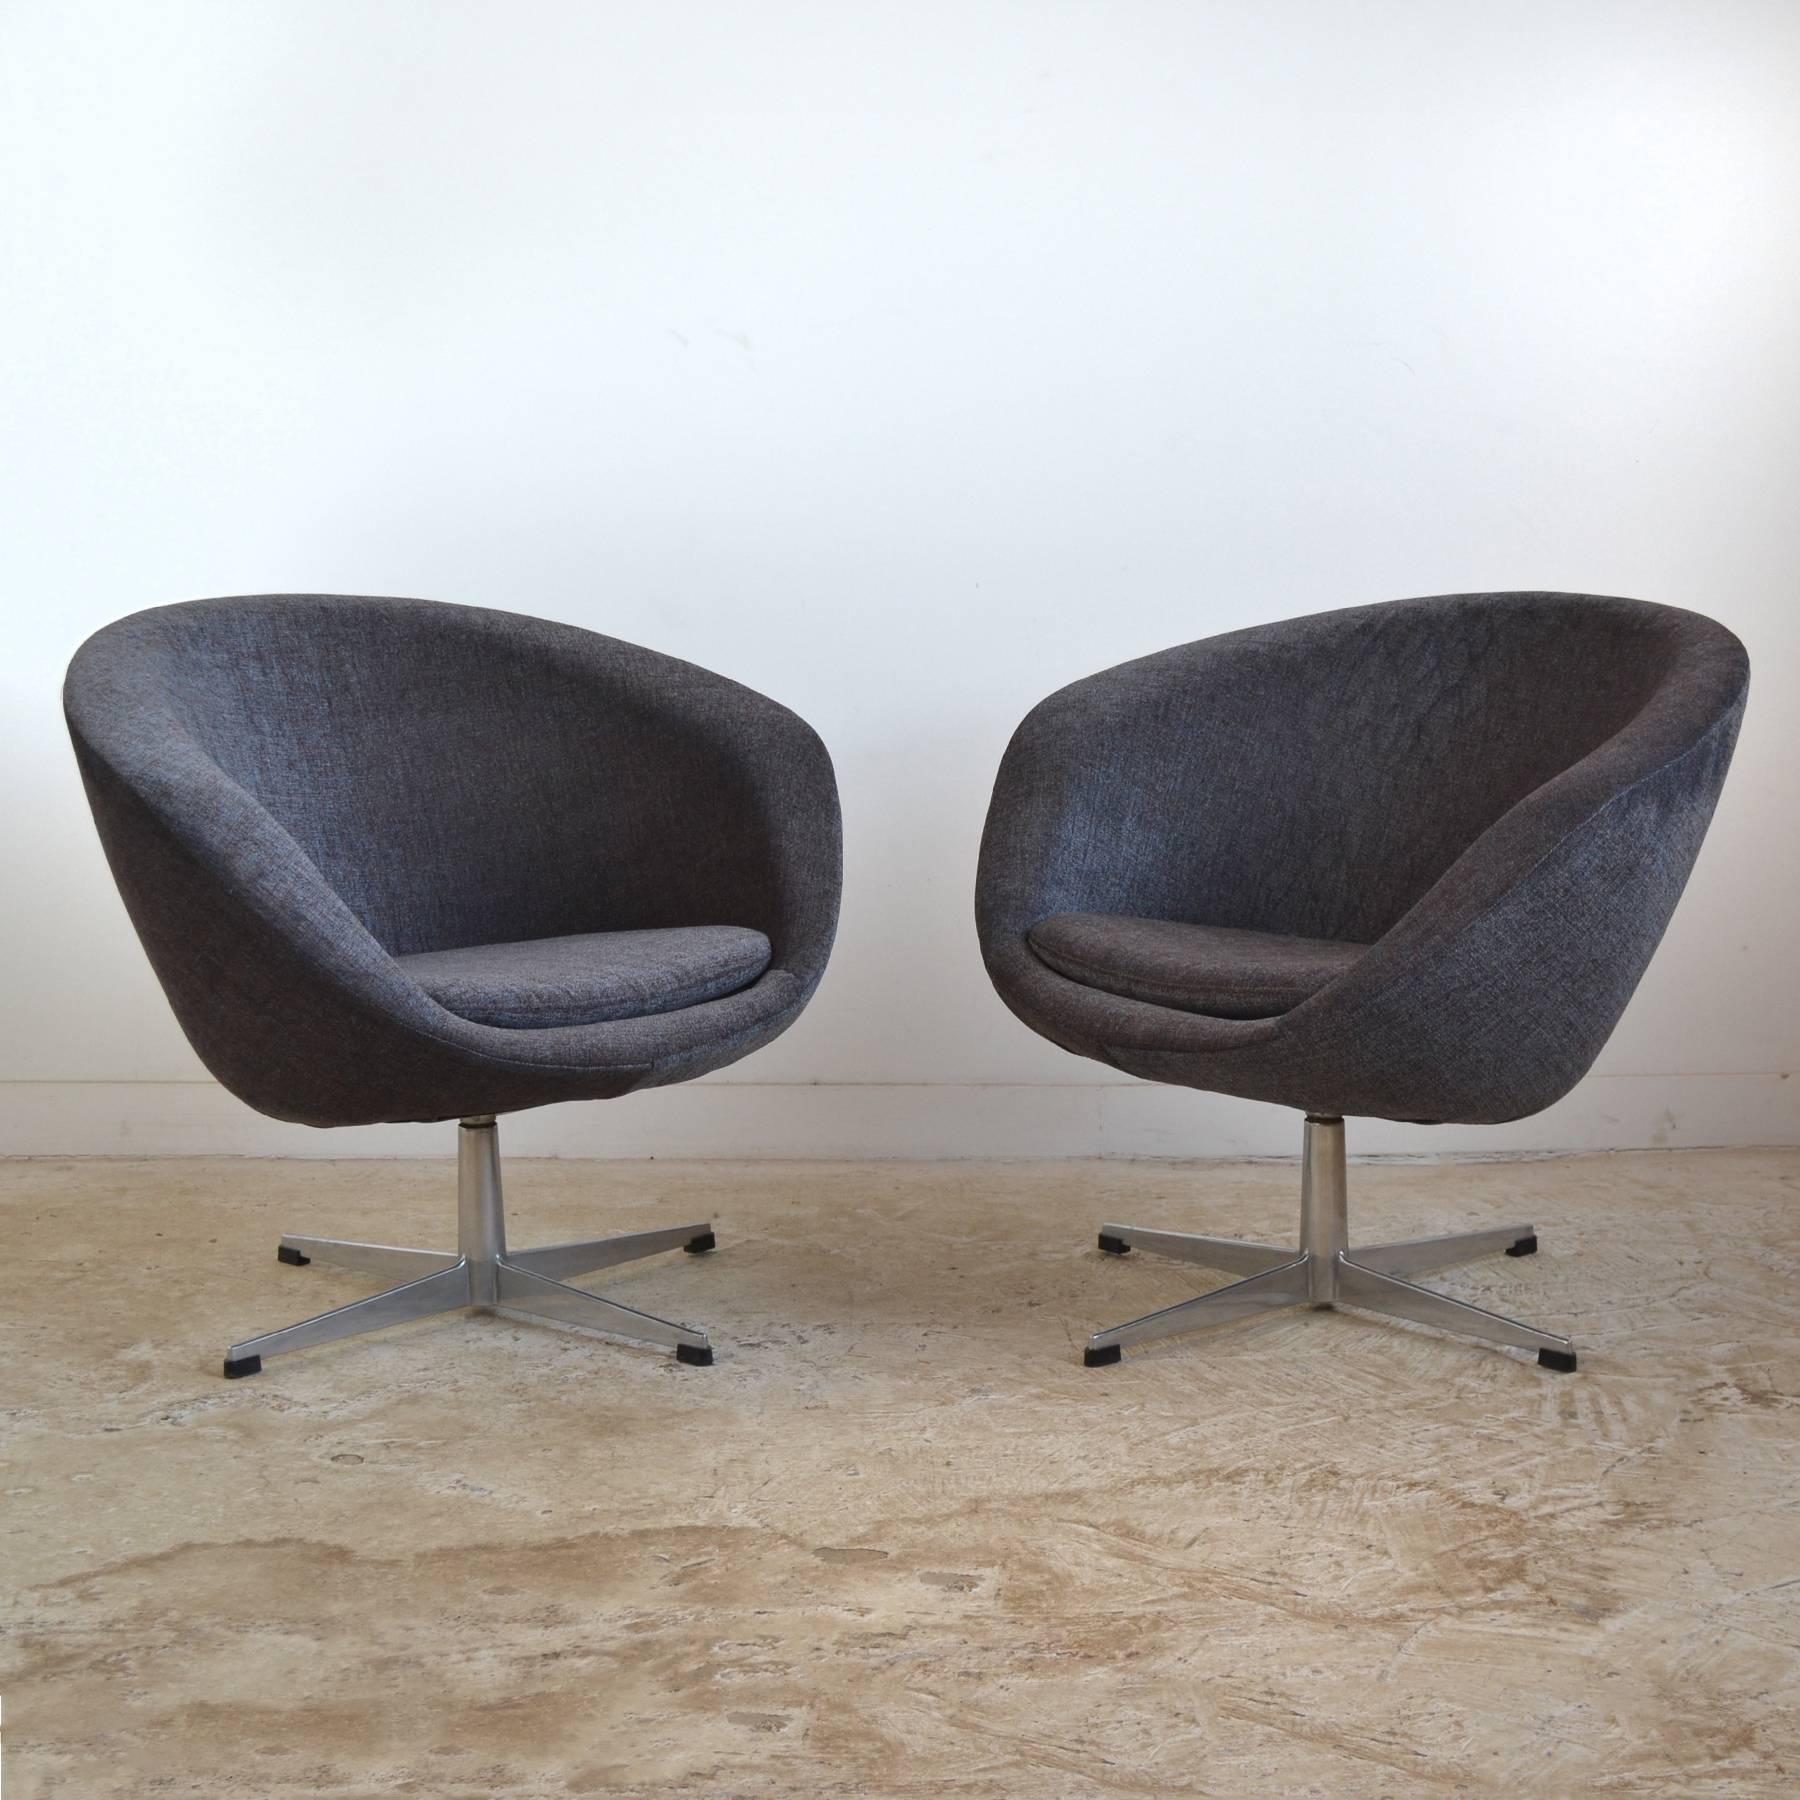 These two lounge chairs designed by Carl Eric Klote for his company Overman obviously take design cues from Arne Jacobsen's swan and egg chairs with their sculptural bodies perched atop four star pedestal bases. Overman designs are noteworthy for